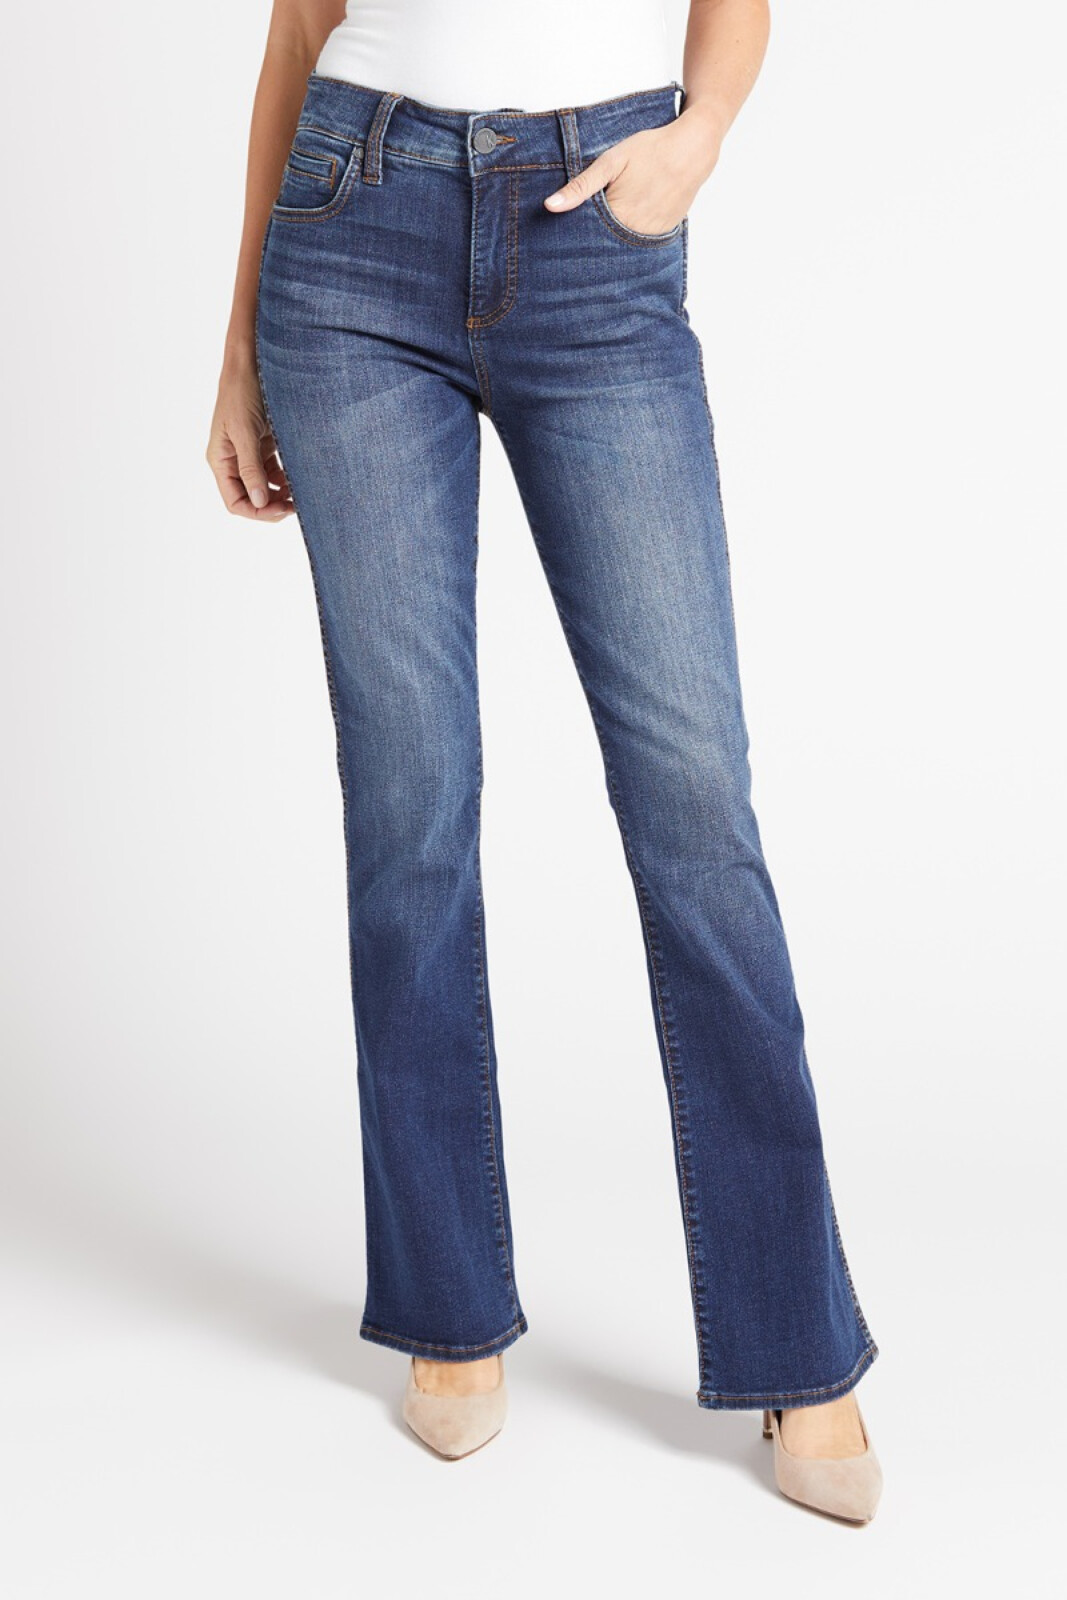 Kut From The Kloth High Rise Fab Ab Natalie Bootcut Evereve